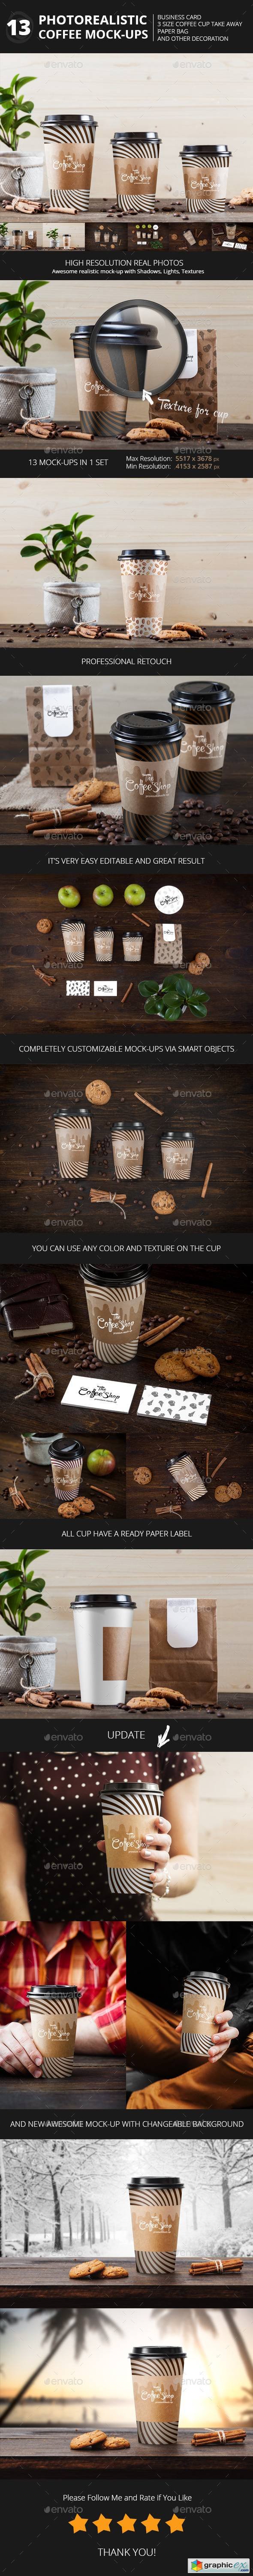 Coffee Collection Branding Mock-Up's